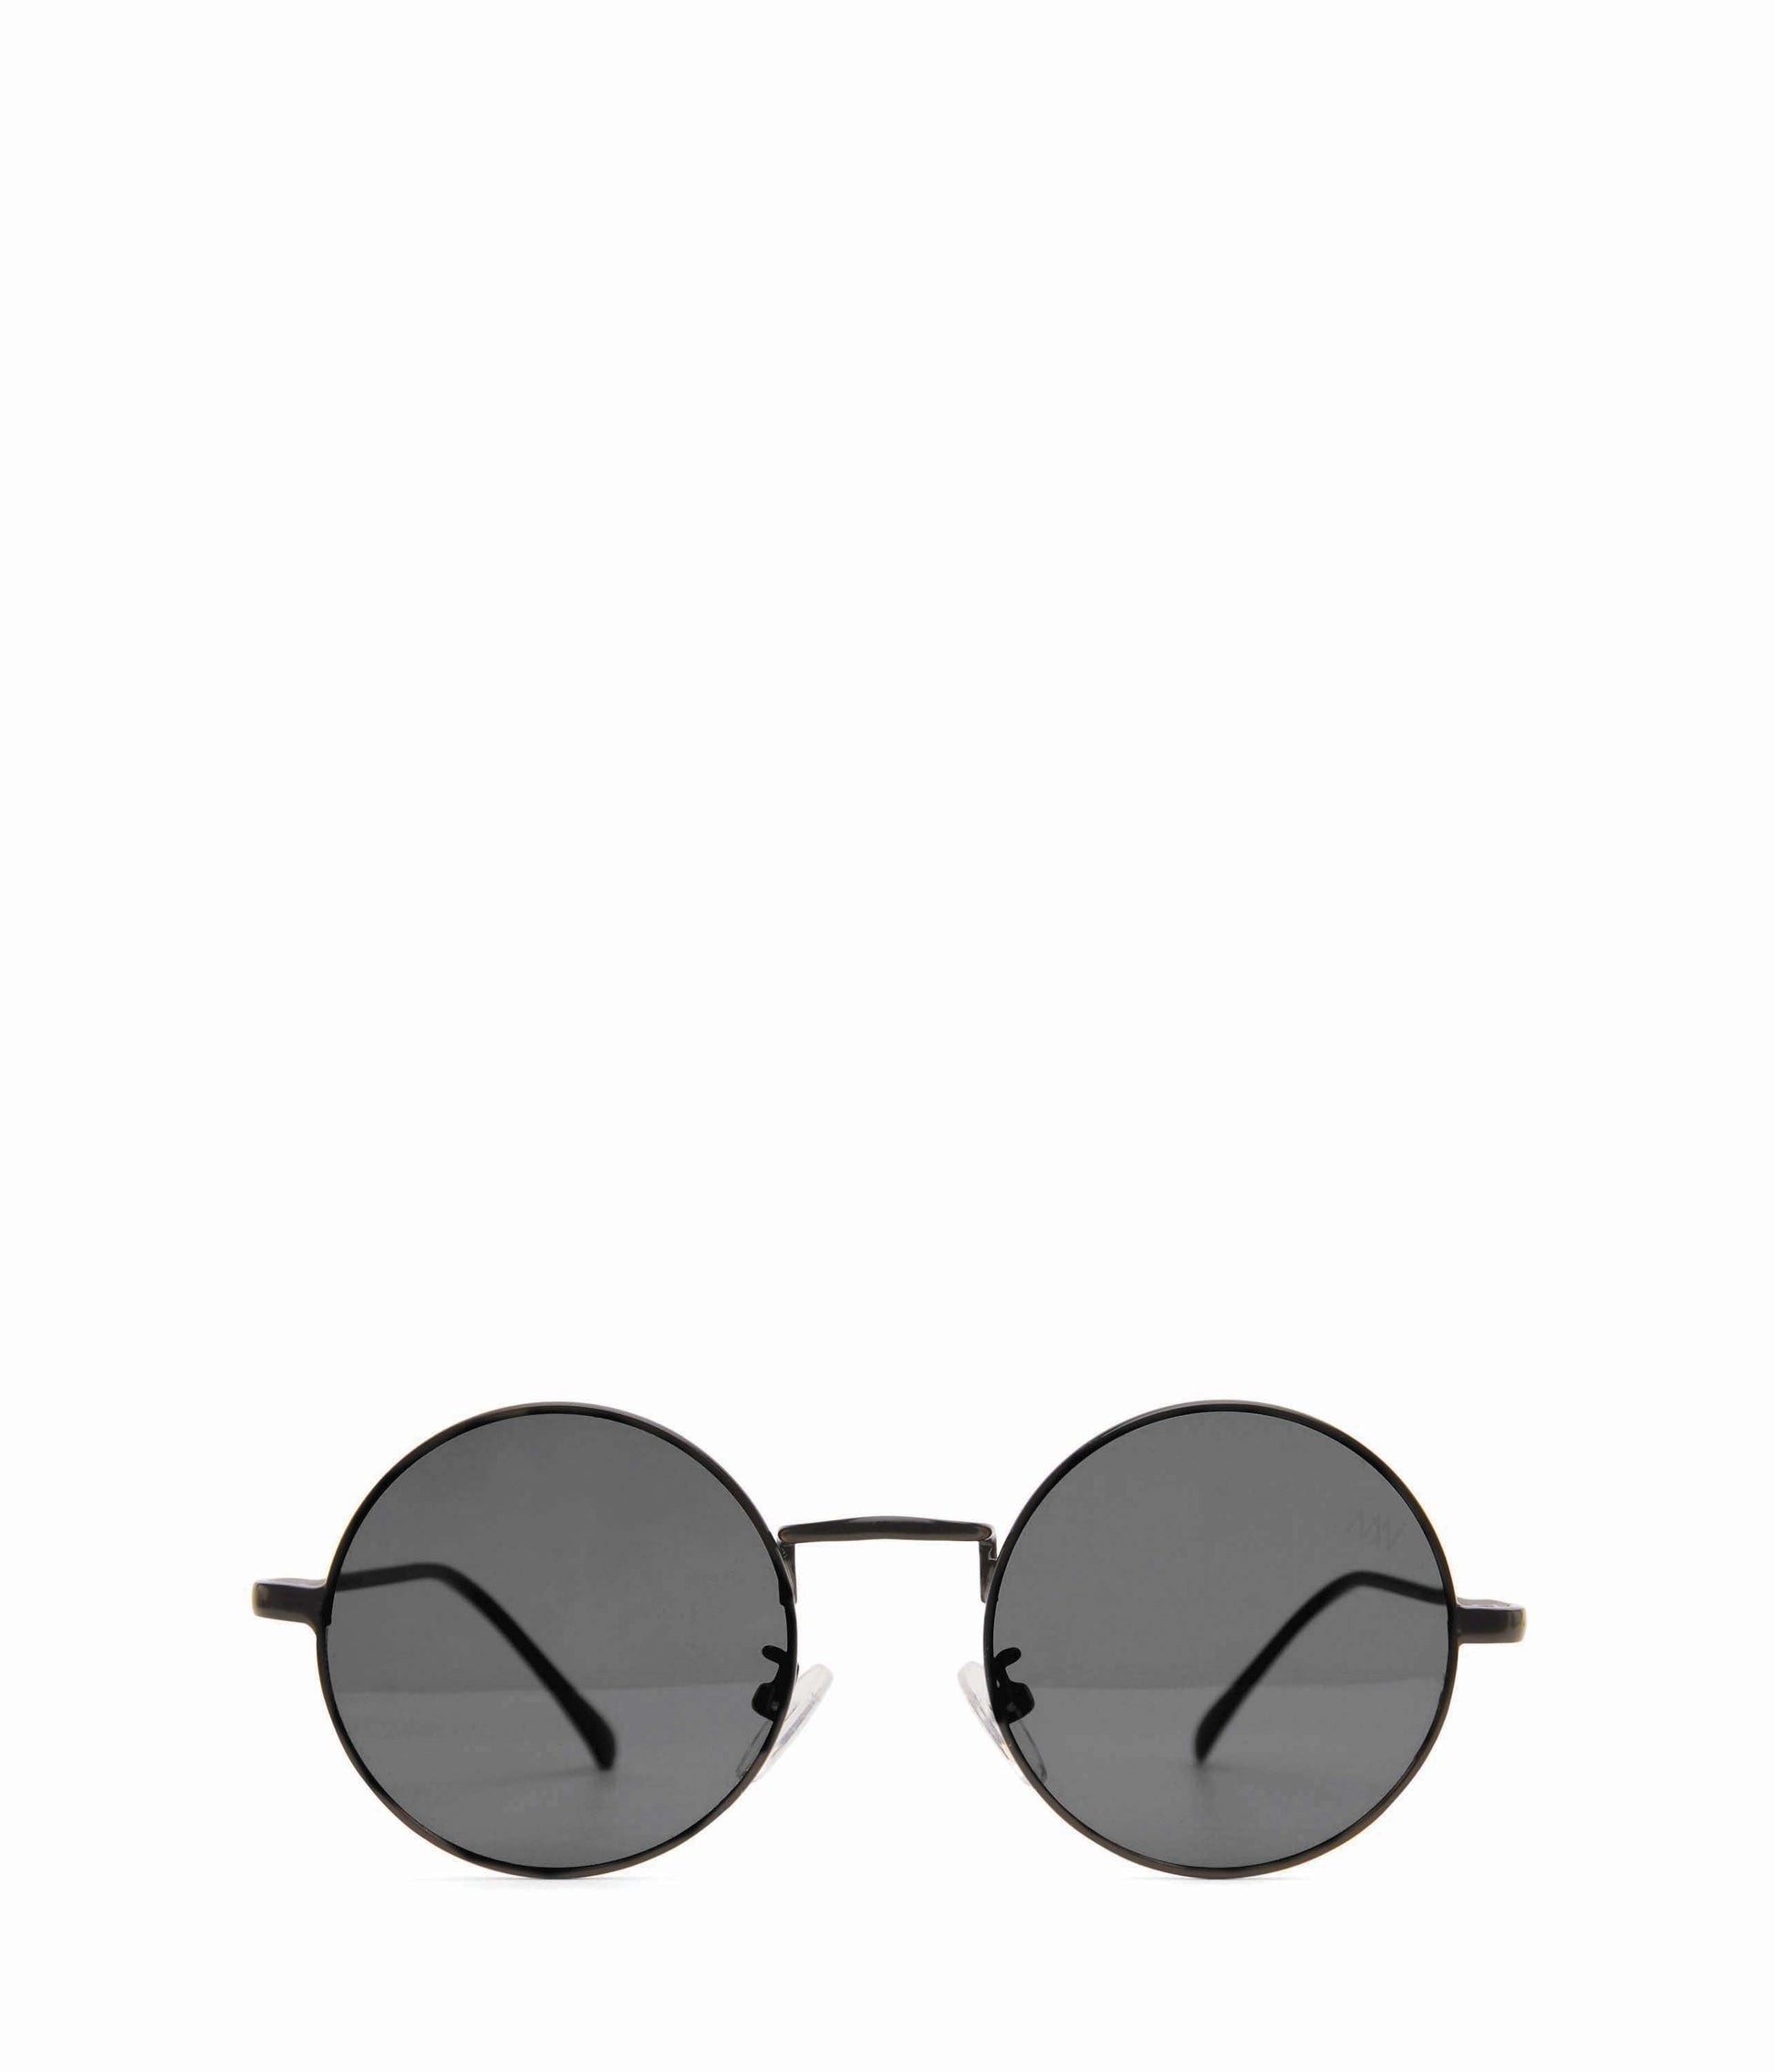 Buy Urban Shadow sunglasses frame (small, black) at Amazon.in